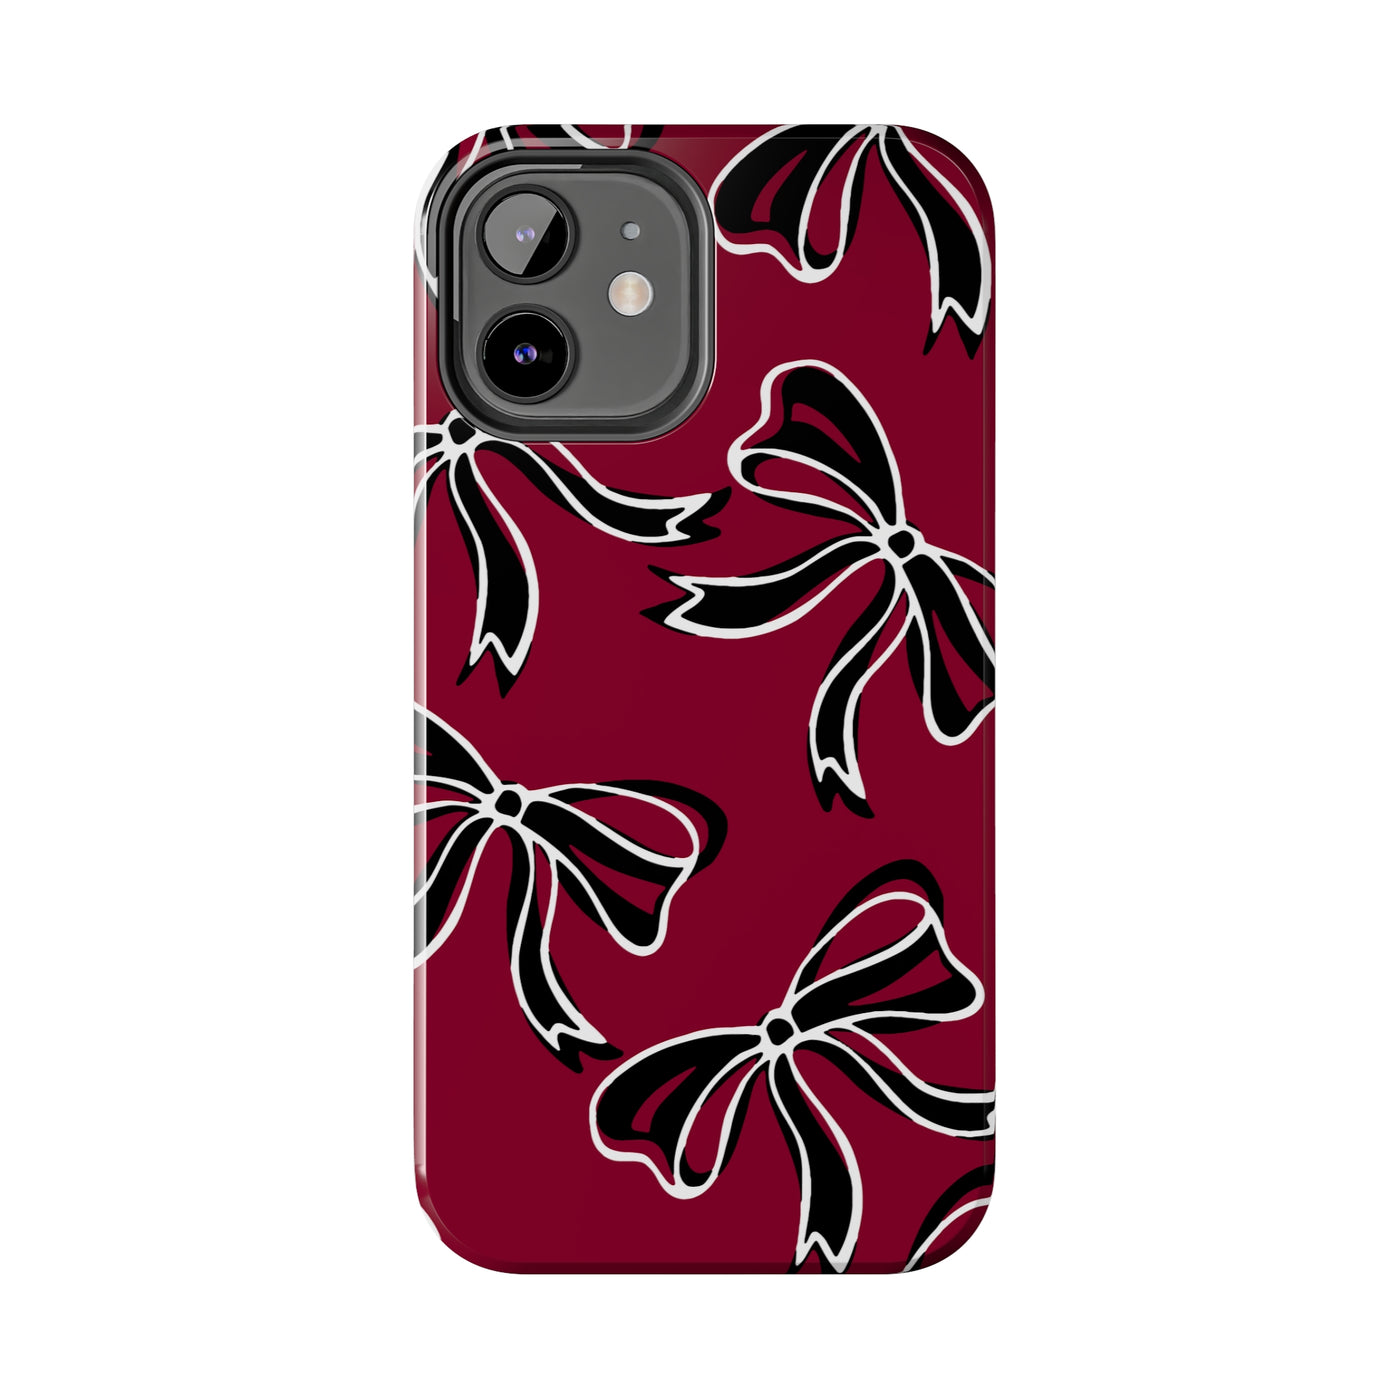 Trendy Bow Phone Case, Bed Party Bow Iphone case, Bow Phone Case, - South Carolina, Gamecocks, USC, garnet and black